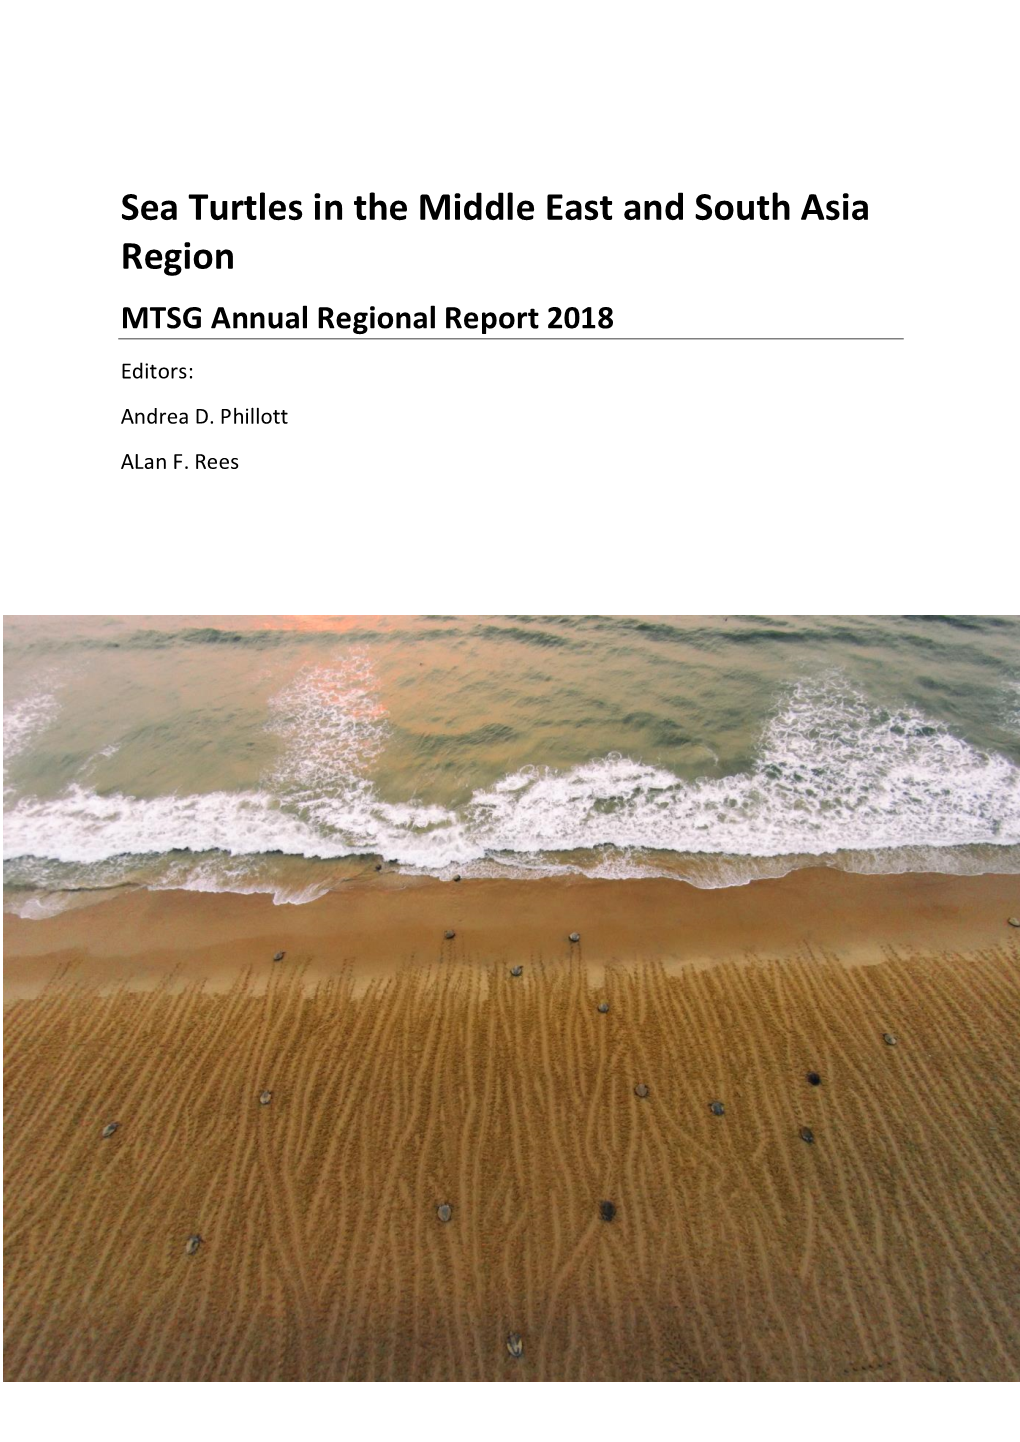 Sea Turtles in the Middle East and South Asia Region MTSG Annual Regional Report 2018